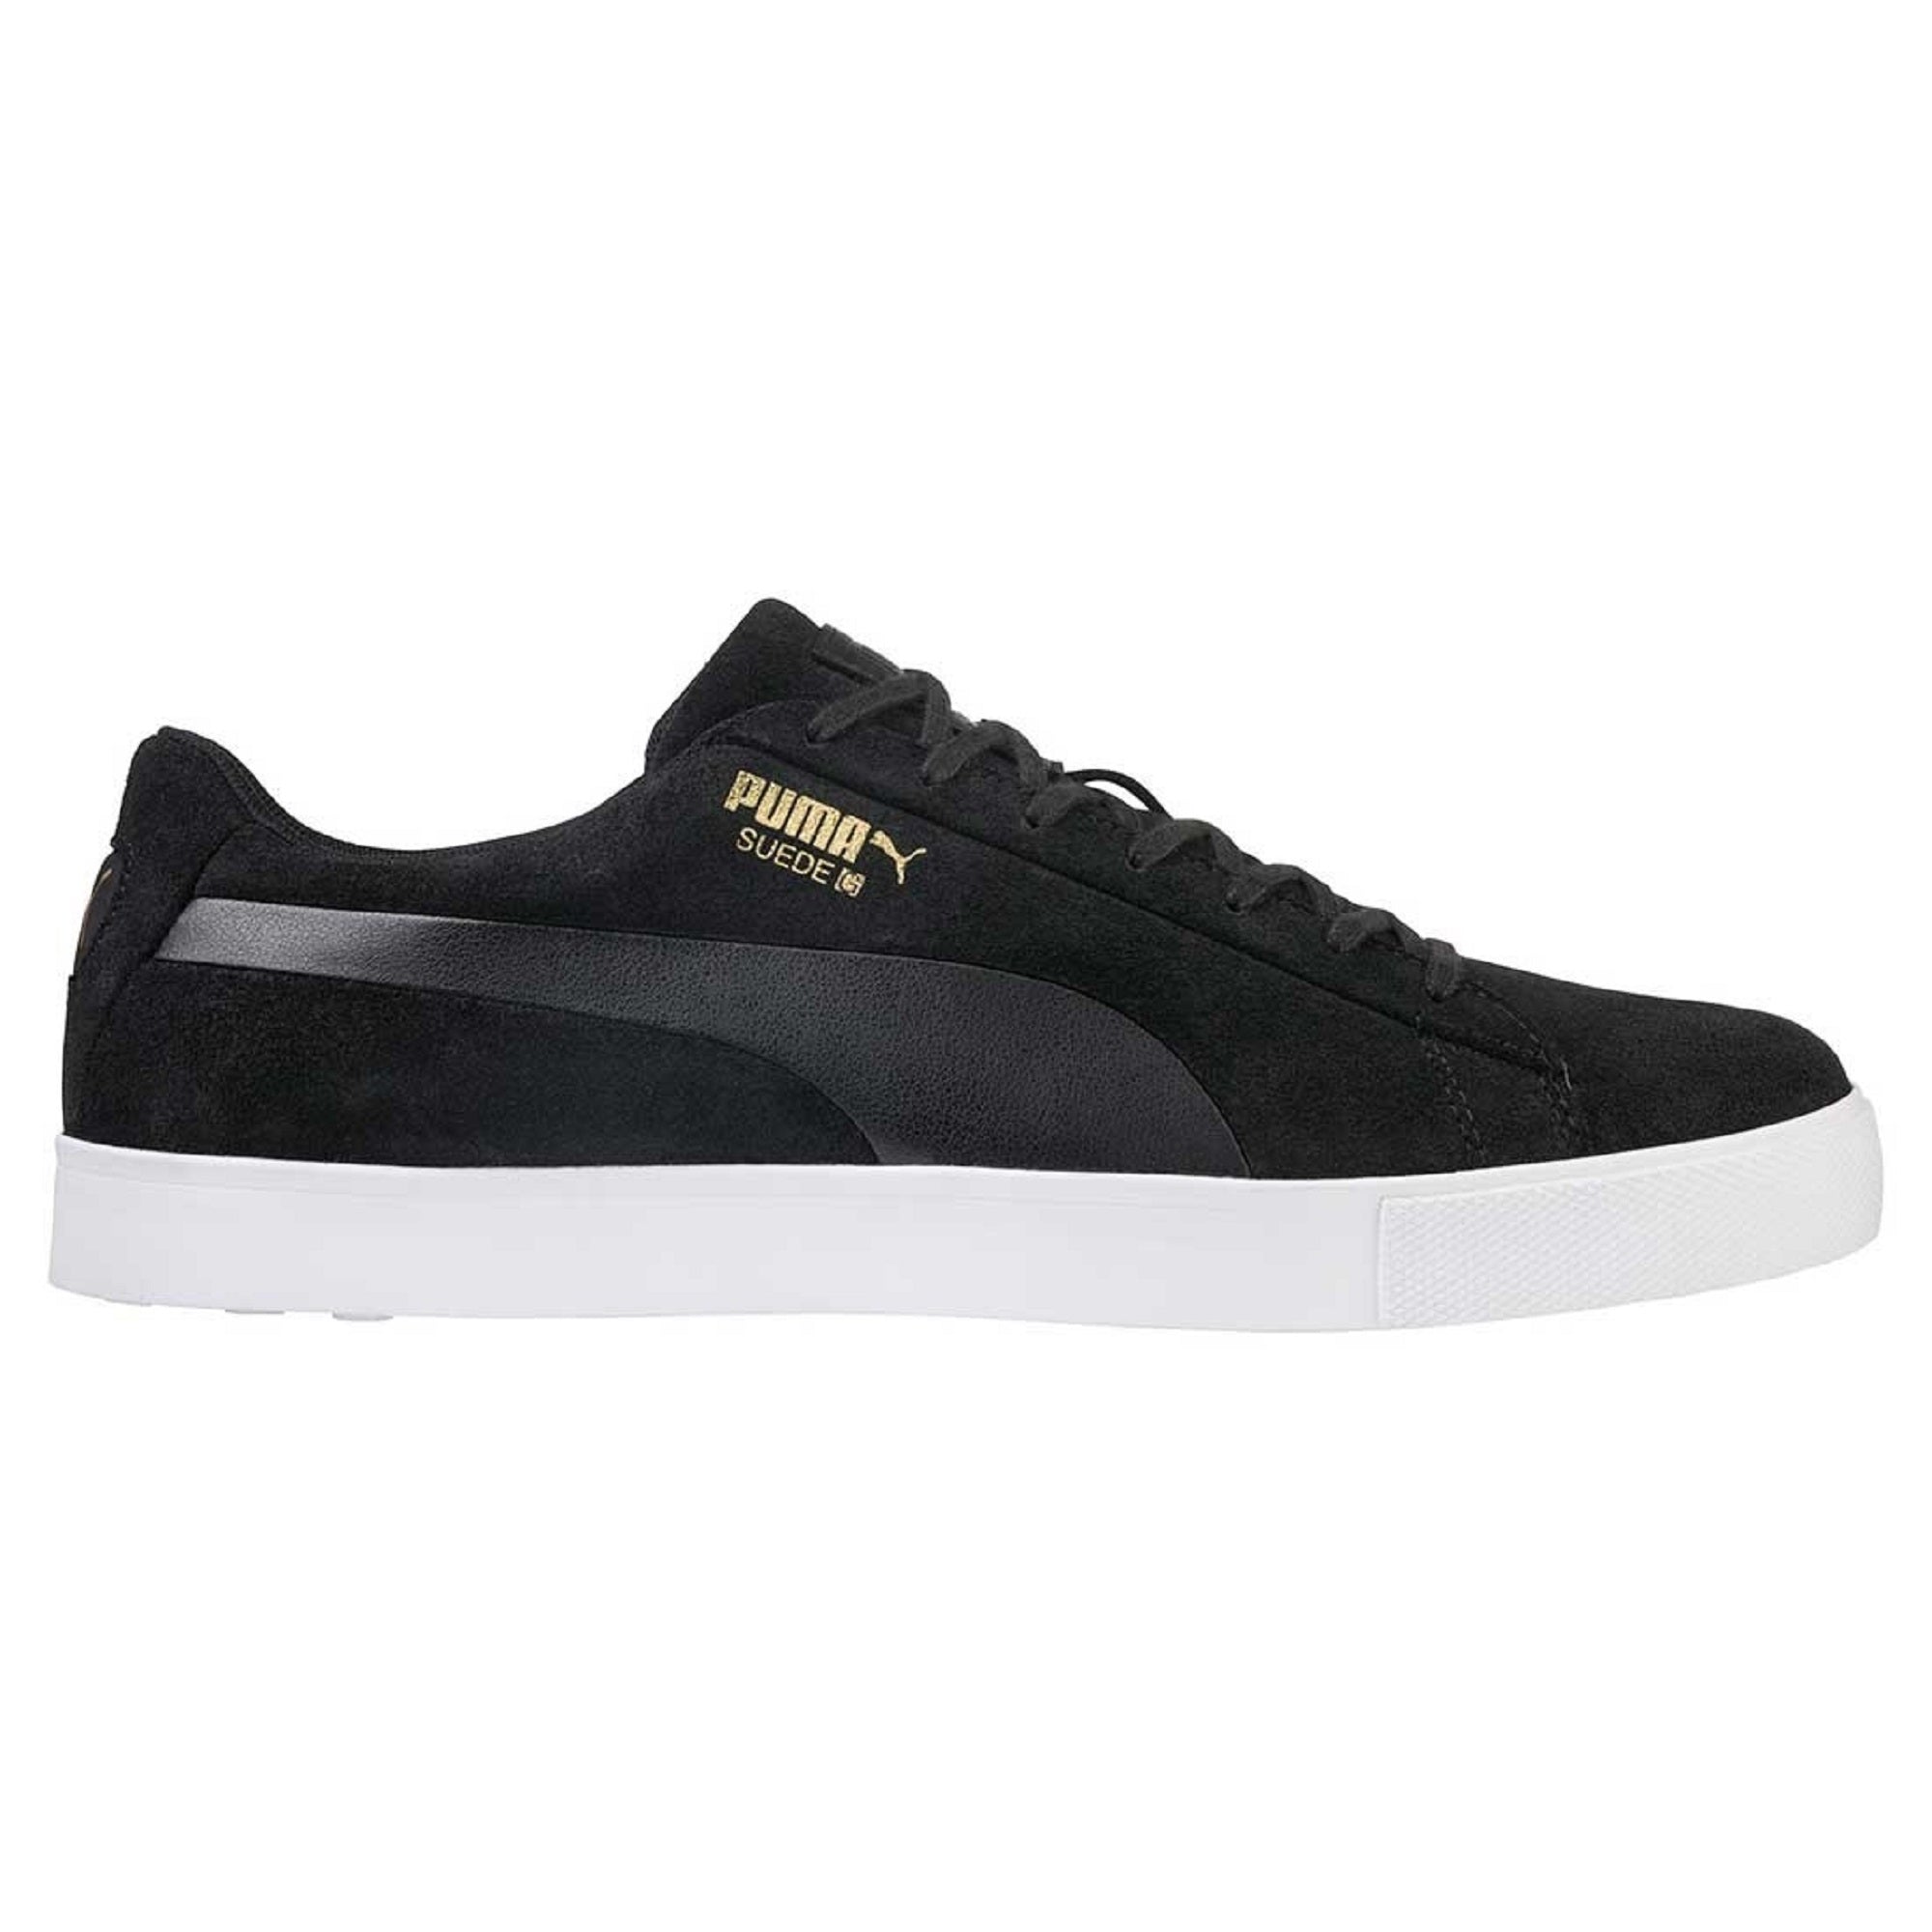 Puma Suede G Golf Shoes 191205 Black White 02 | Function18